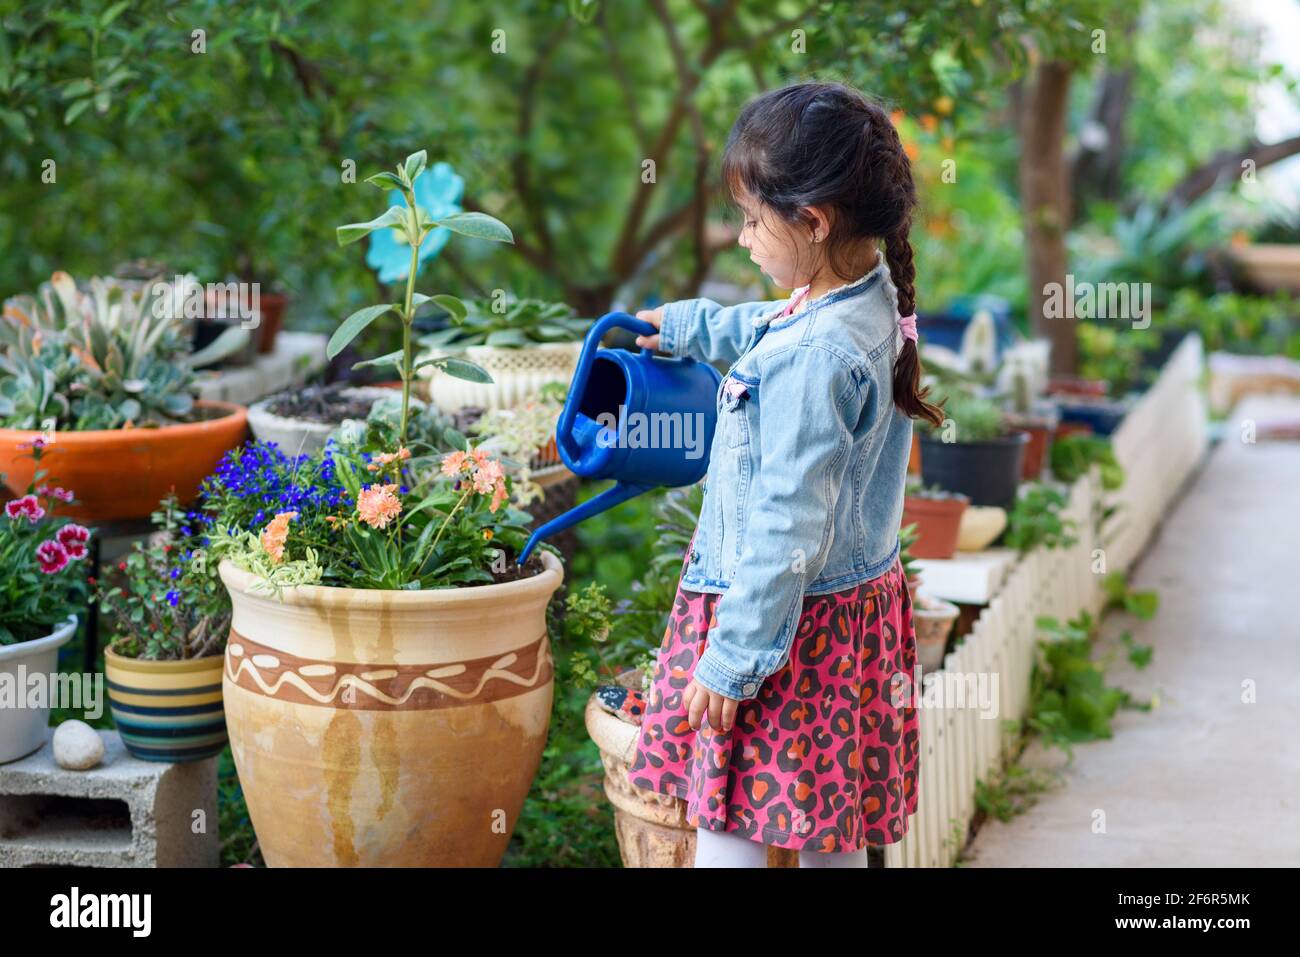 Cute little girl watering flowers in the garden at summer day. Kid helps to care for the plants with a blue watering can in the garden. Stock Photo